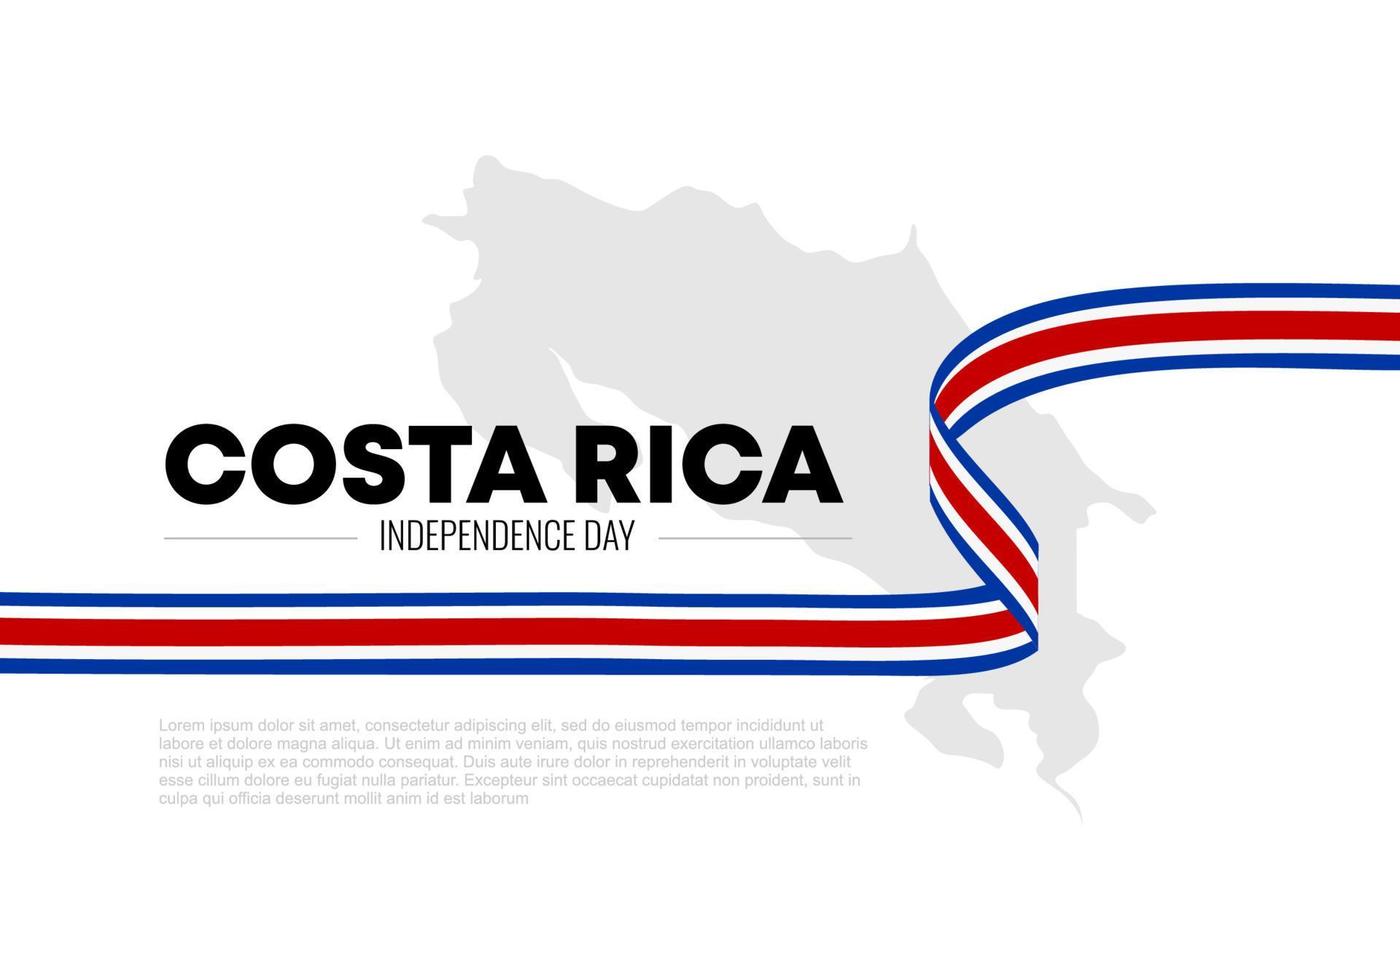 Costa rica independence day for national celebration on september 15. vector